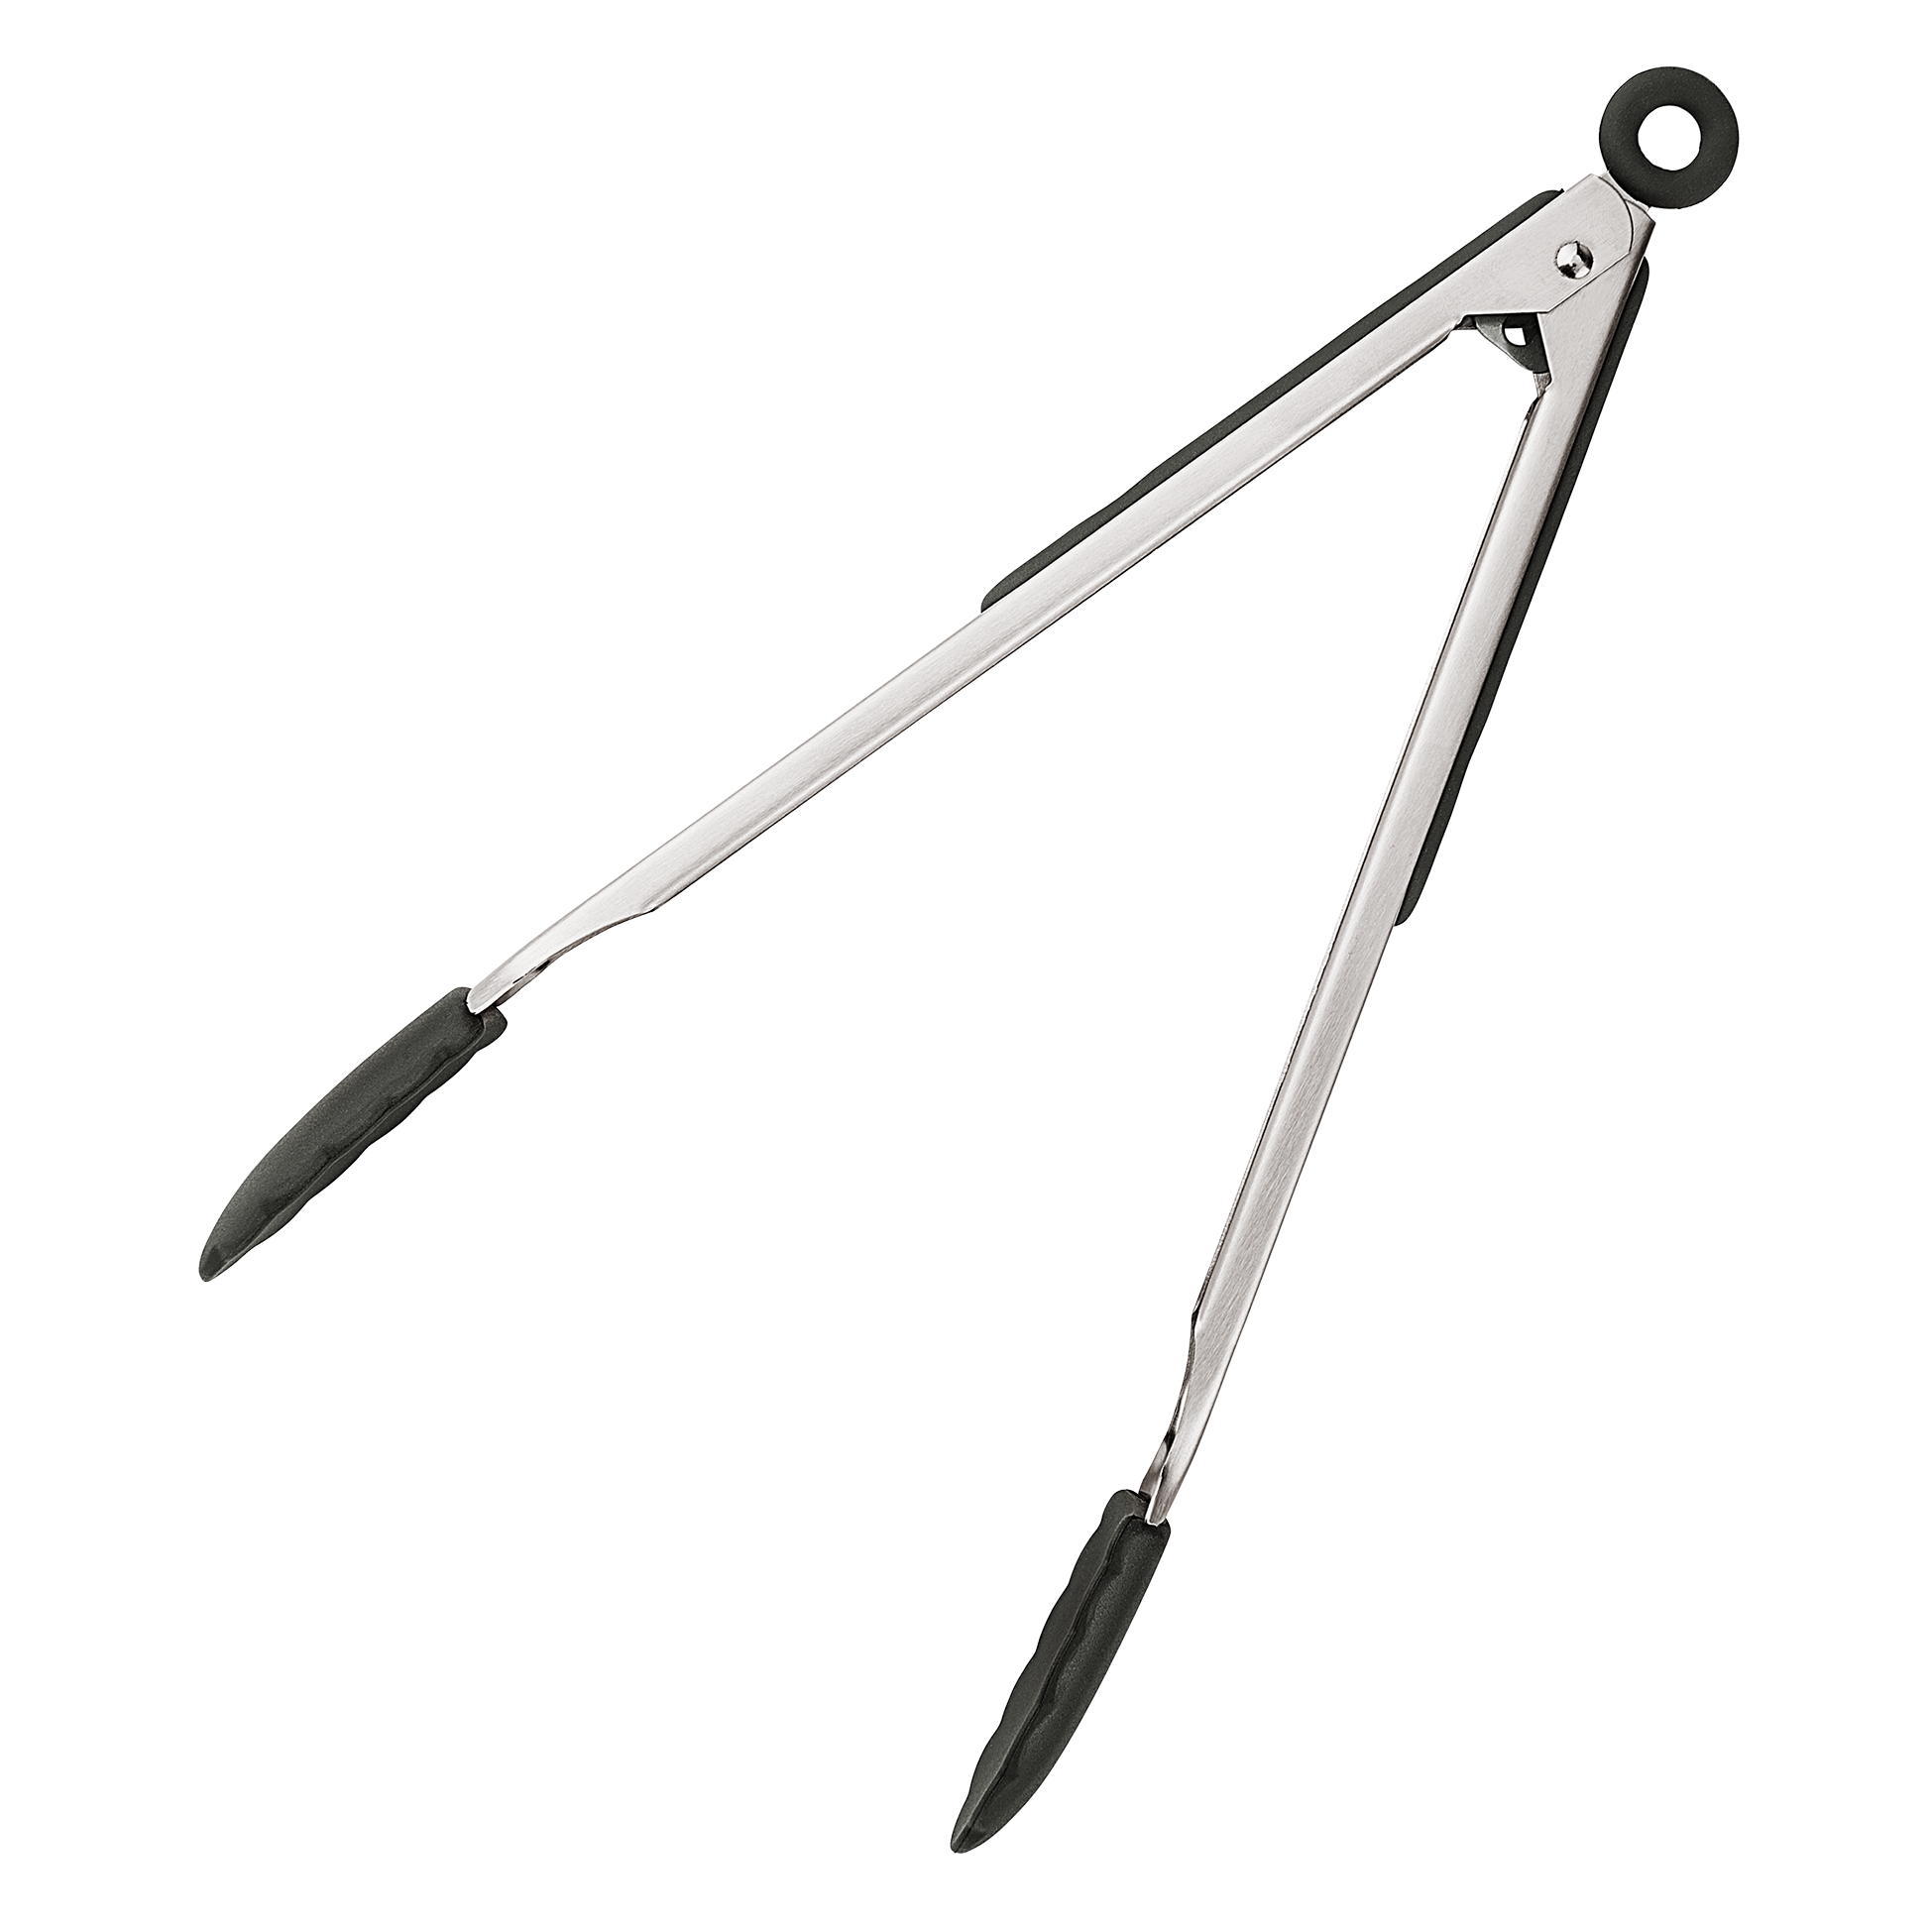 Product photo, side view, 12 inch silicone tongs.